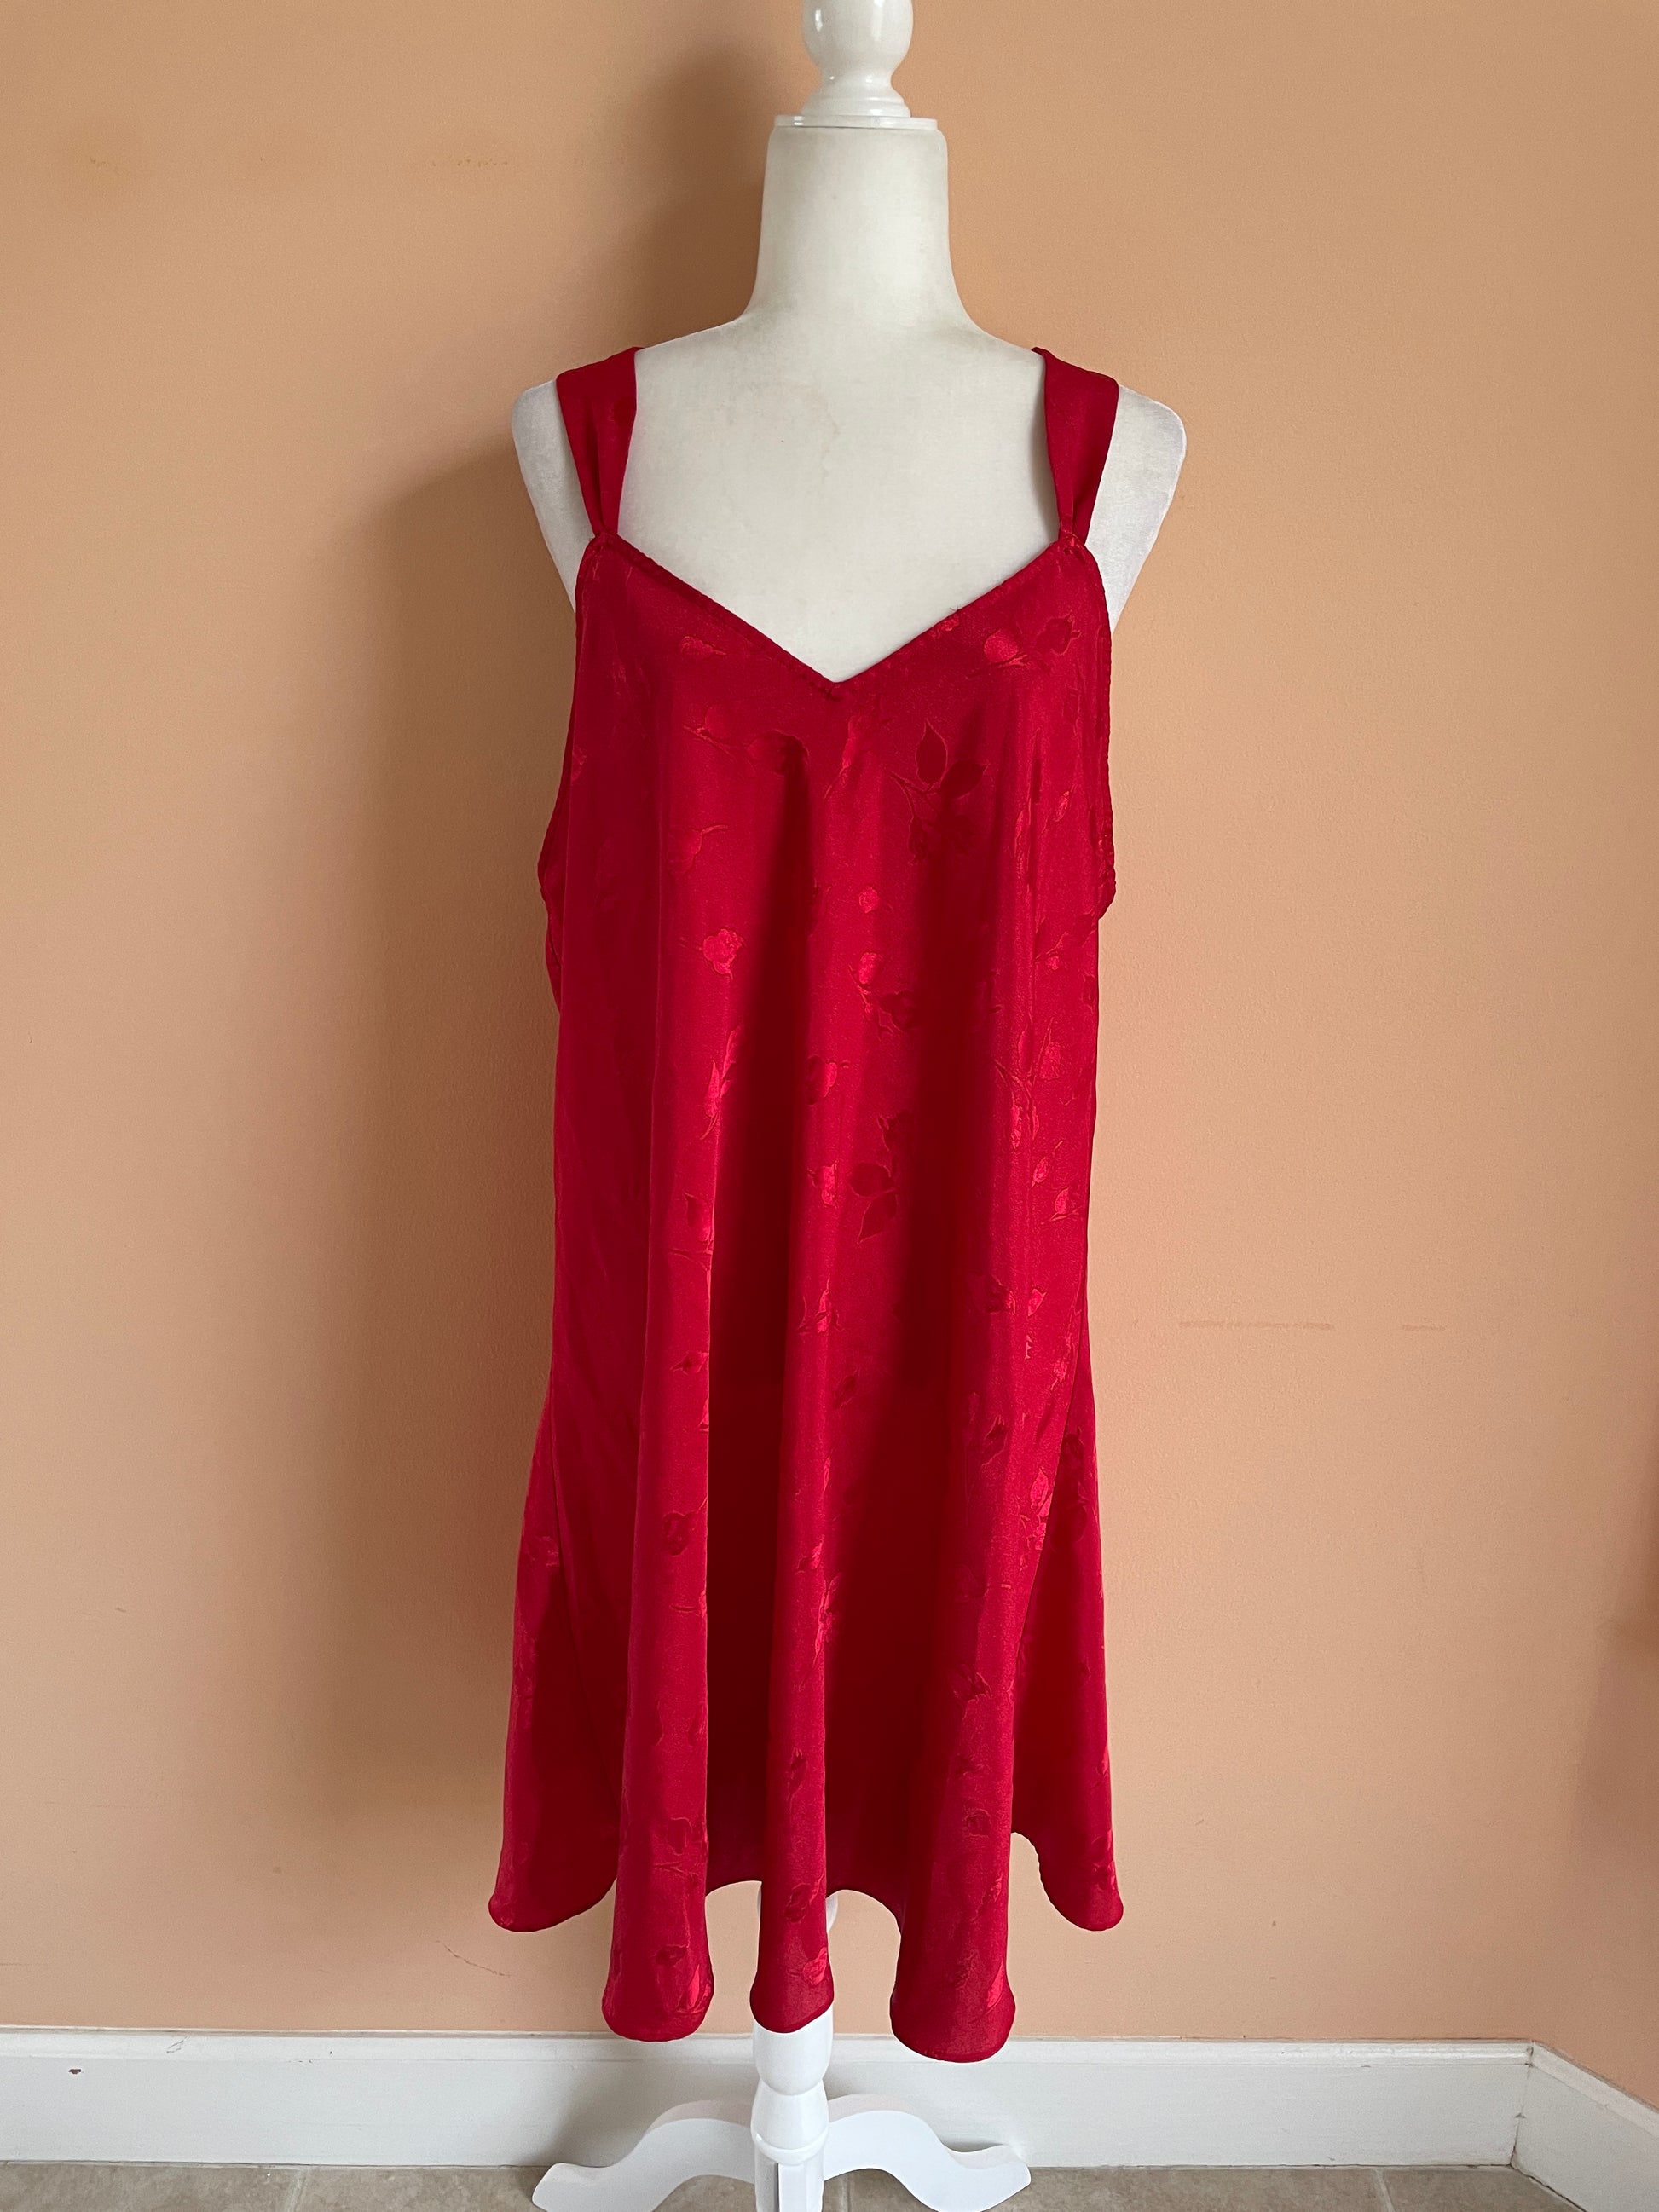 Red Lingerie X/L 2000s Floral Design Red Lounge Lingerie Nightgown X/L